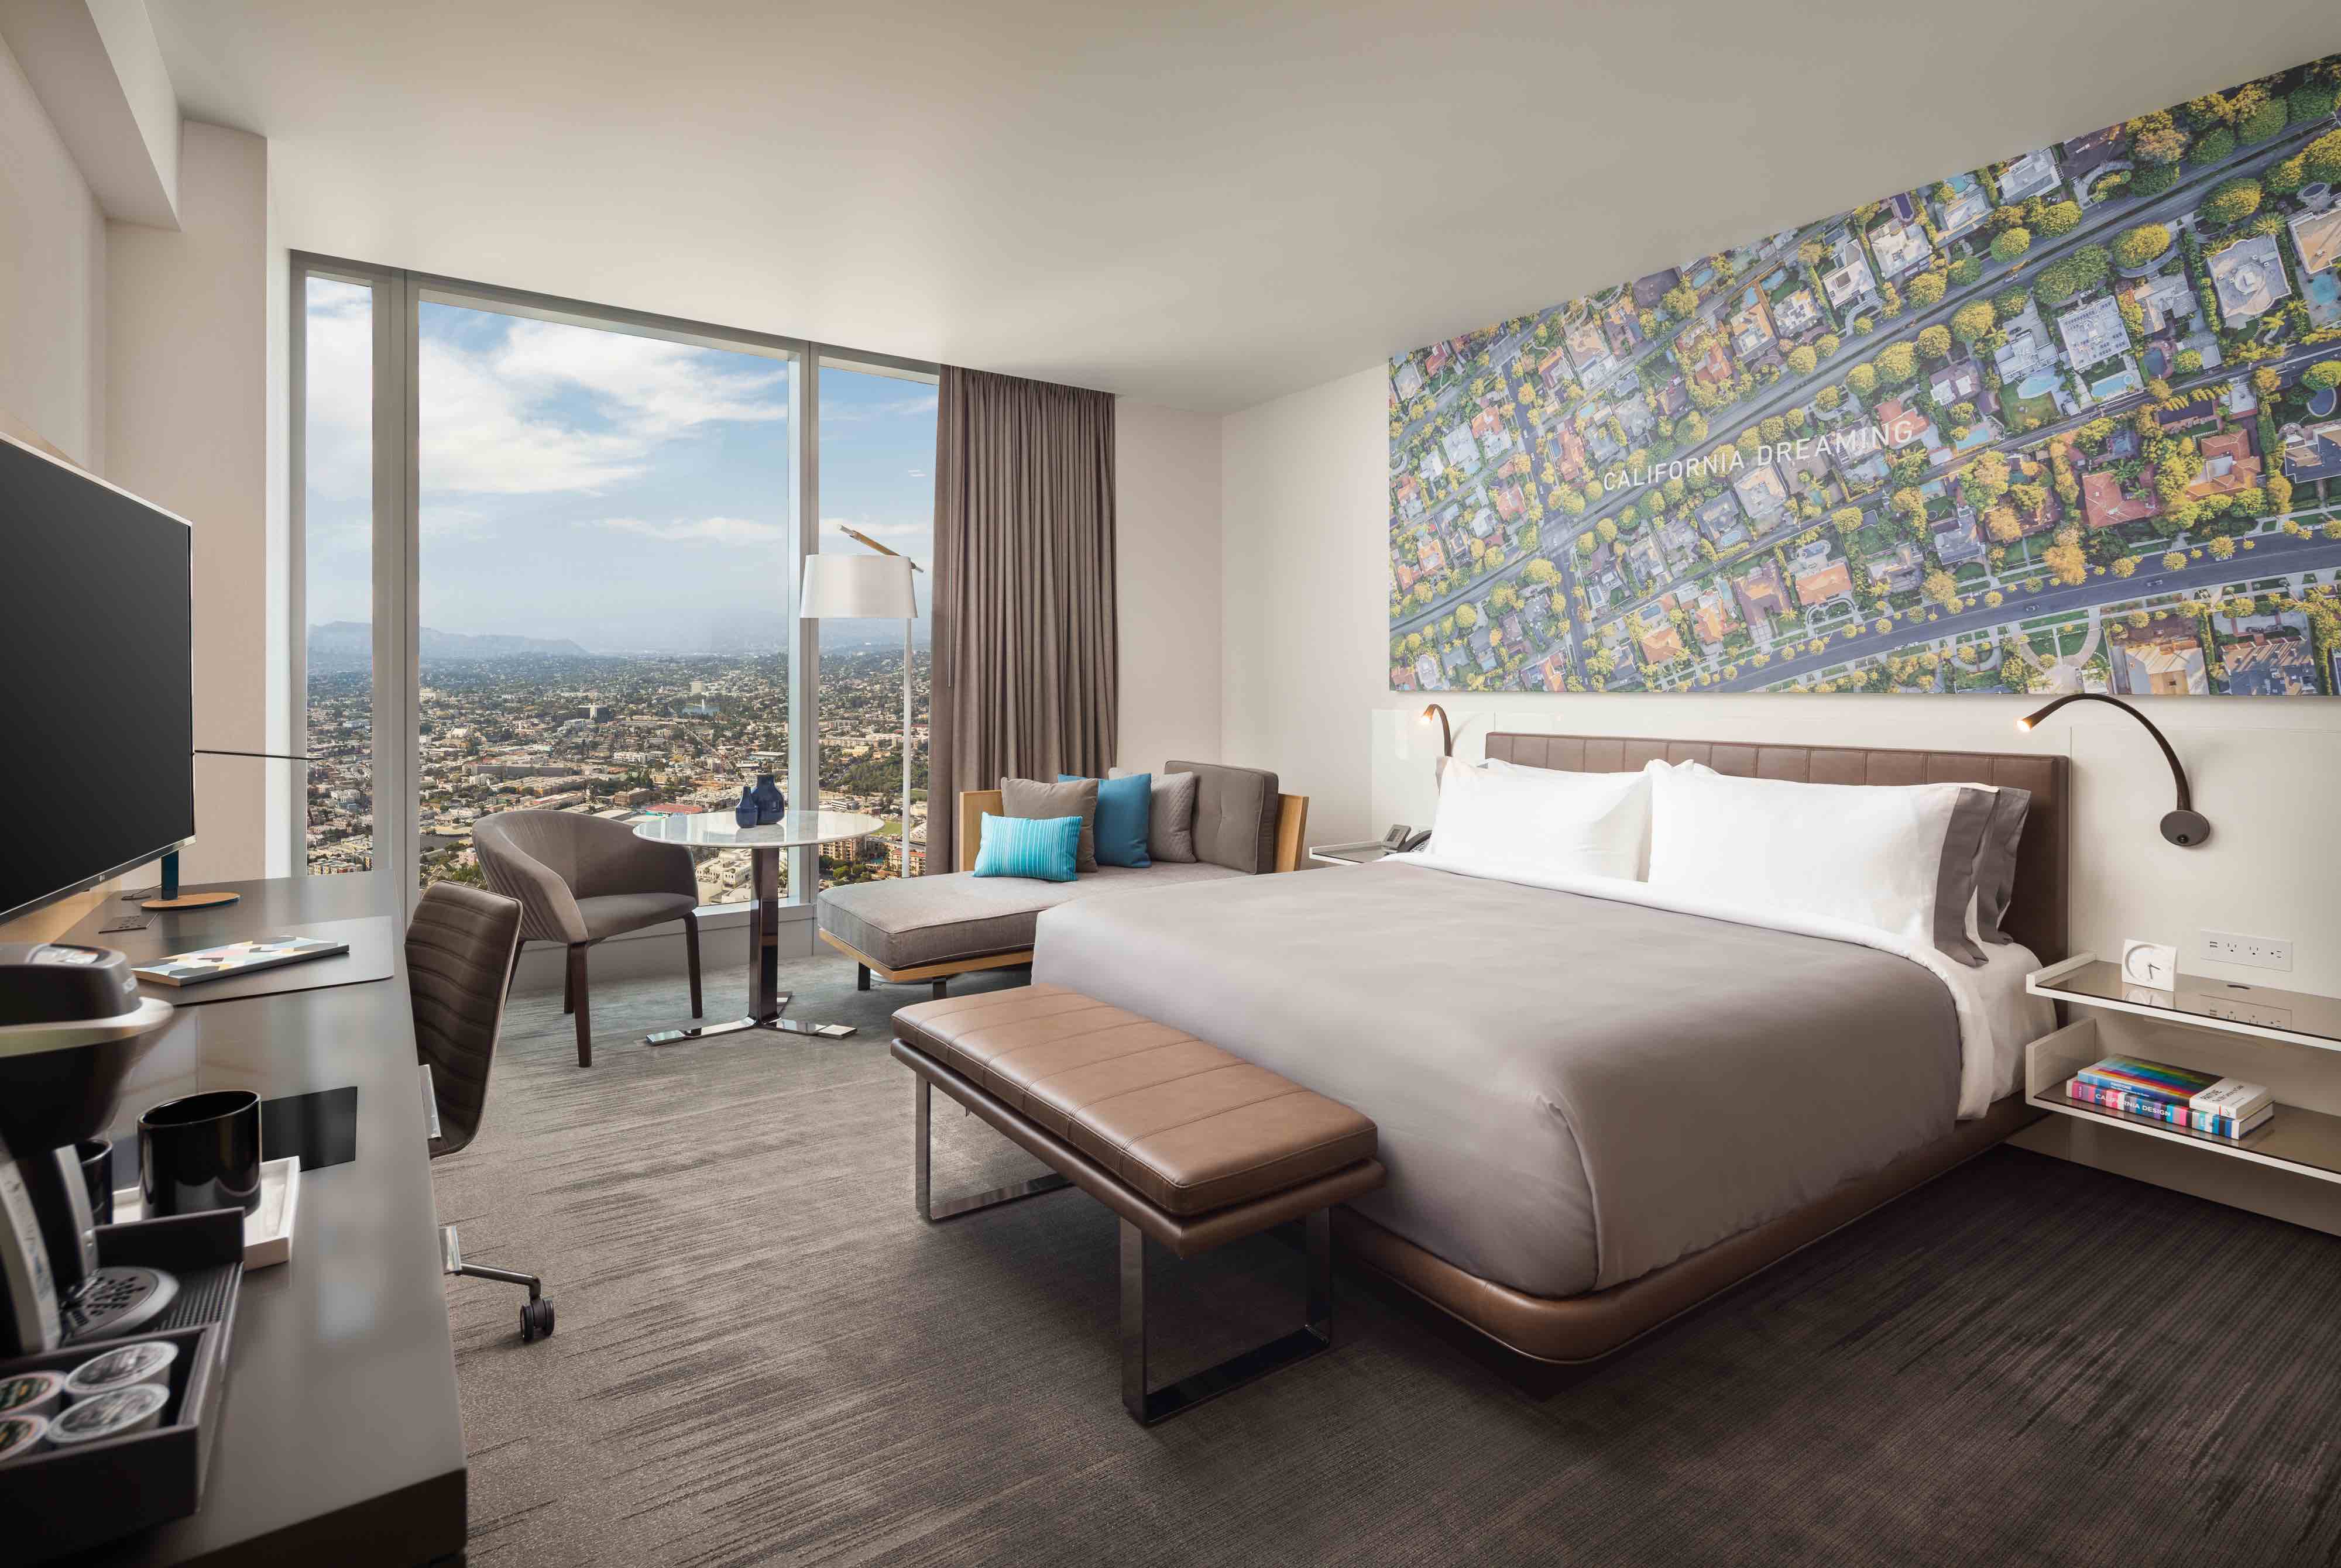 Los Angeles Hotels Hotels For Sale Brand New